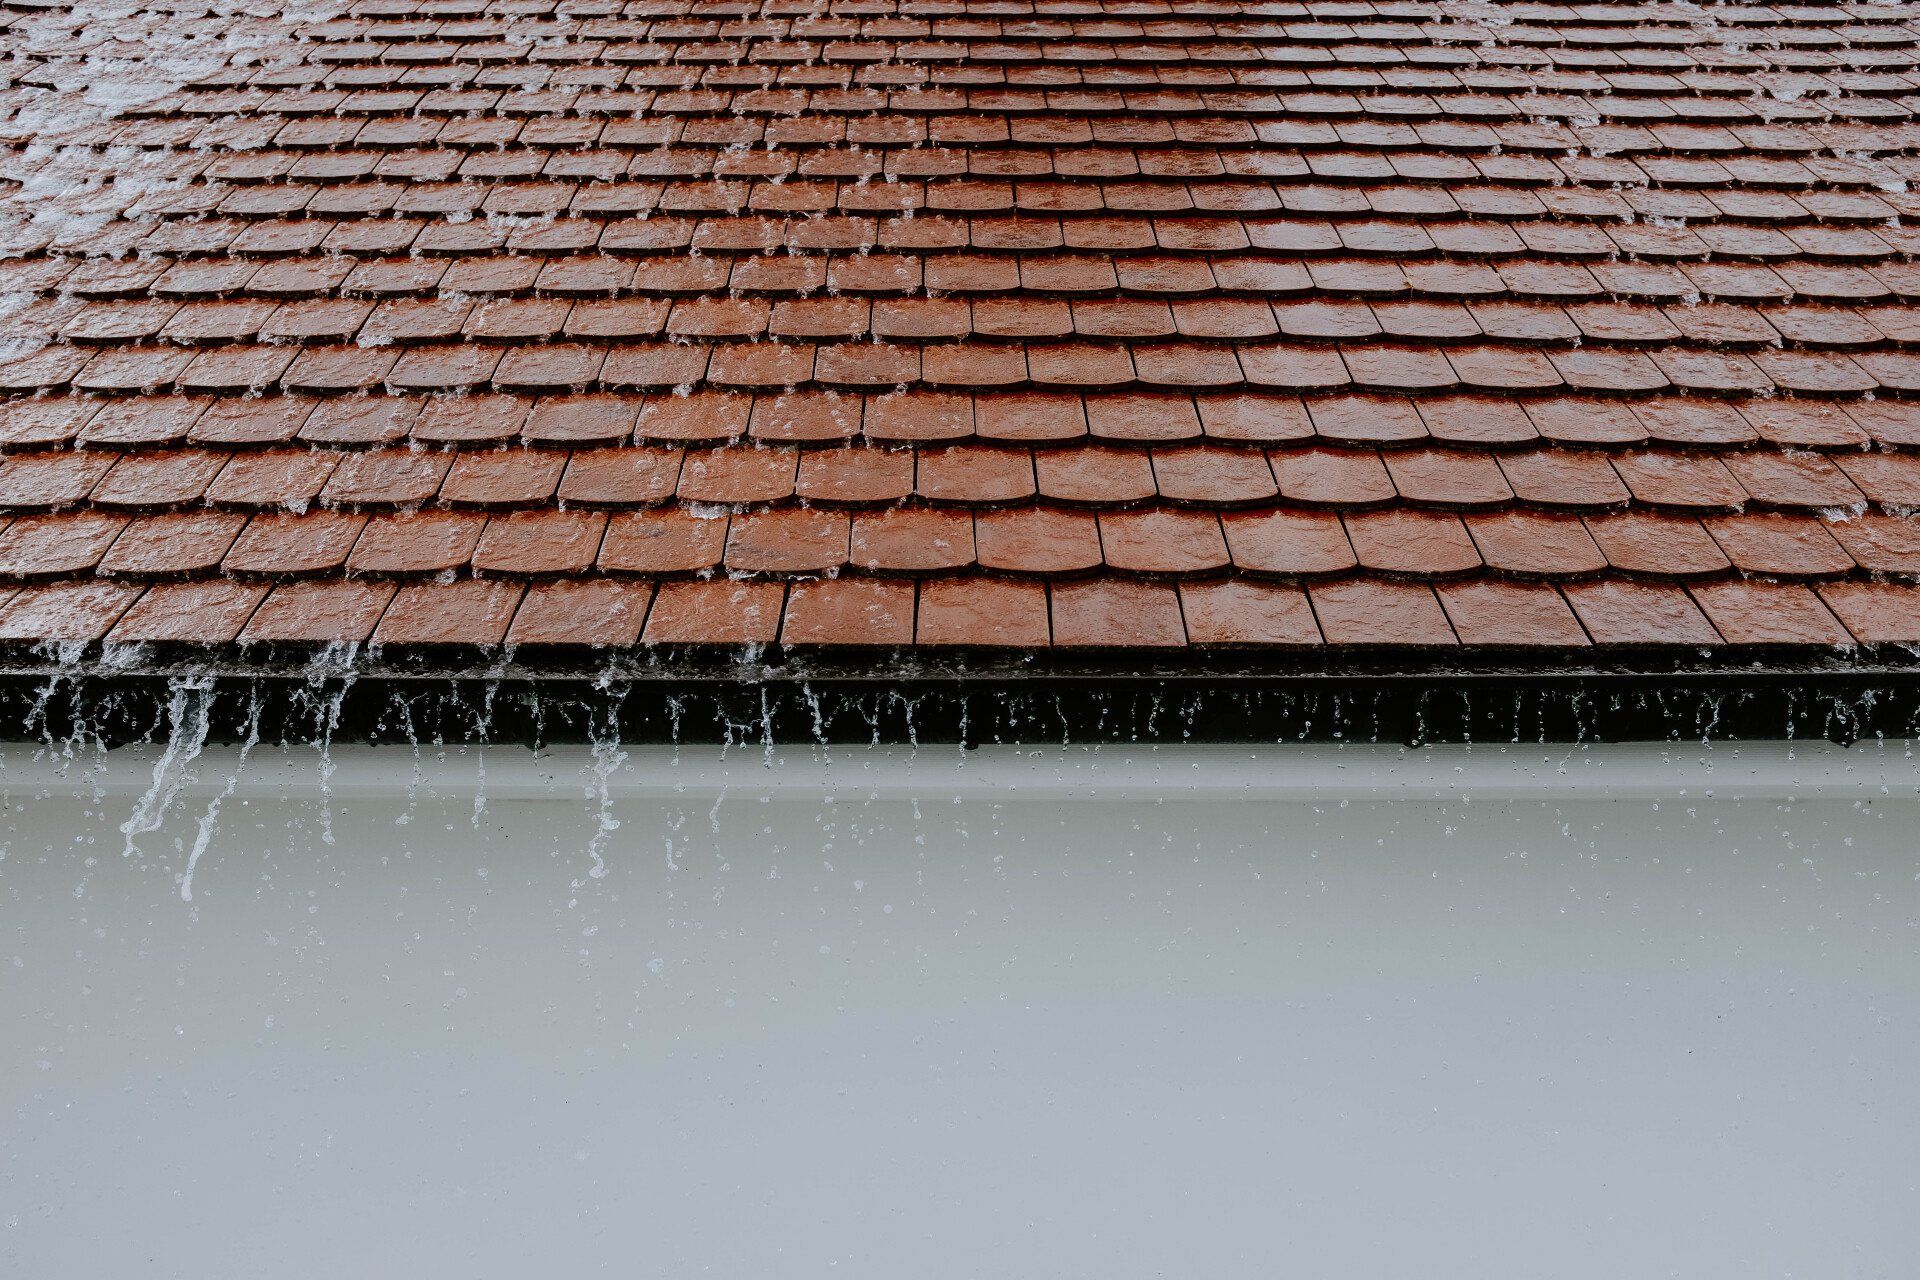 How to Detect a Roof Leak